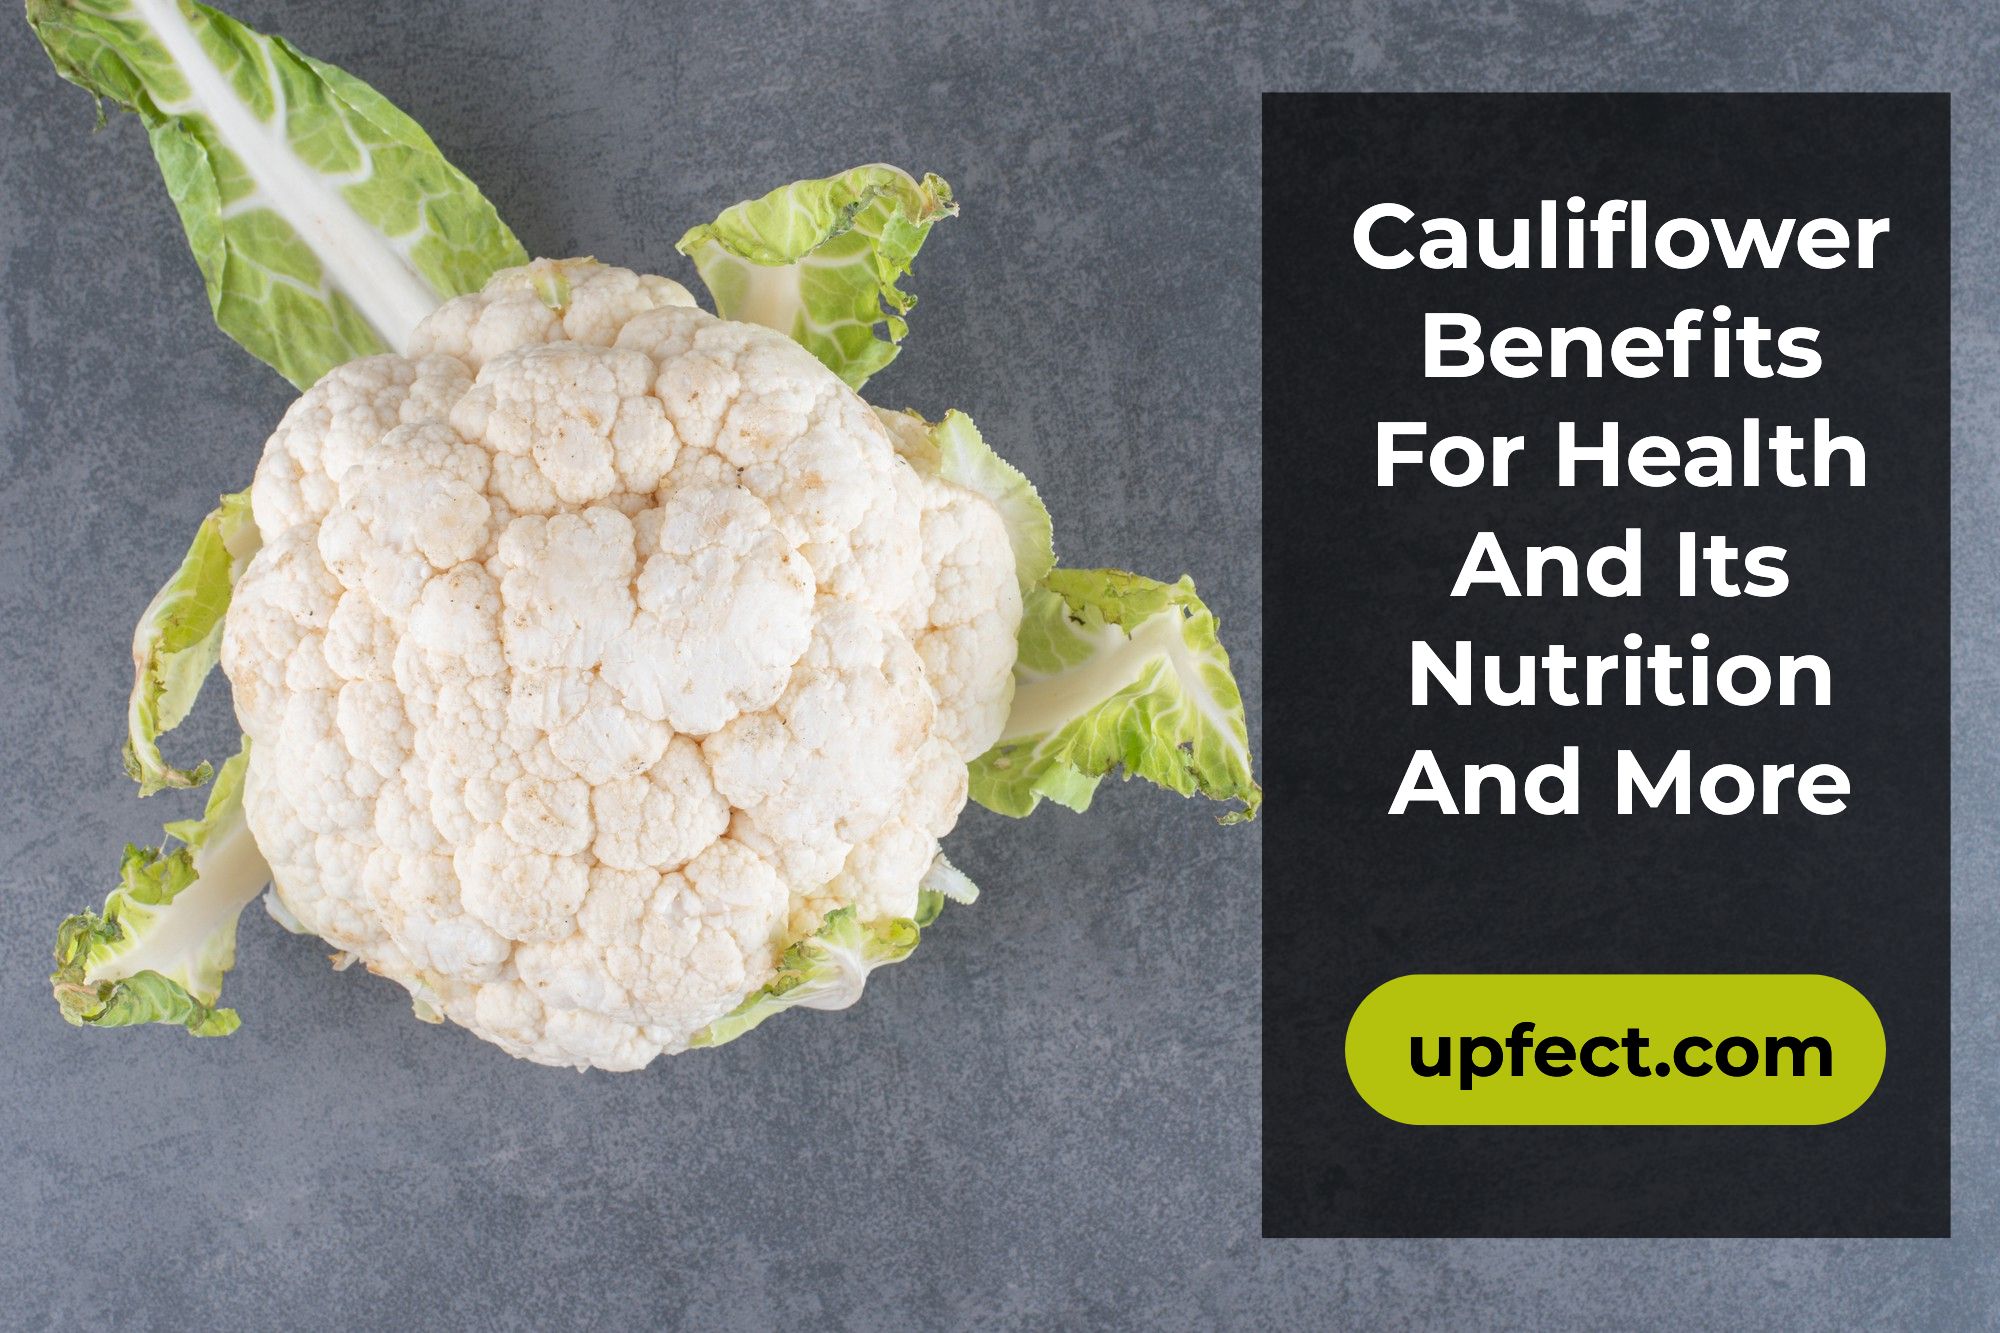 Cauliflower Benefits For Health And Its Nutrition And More